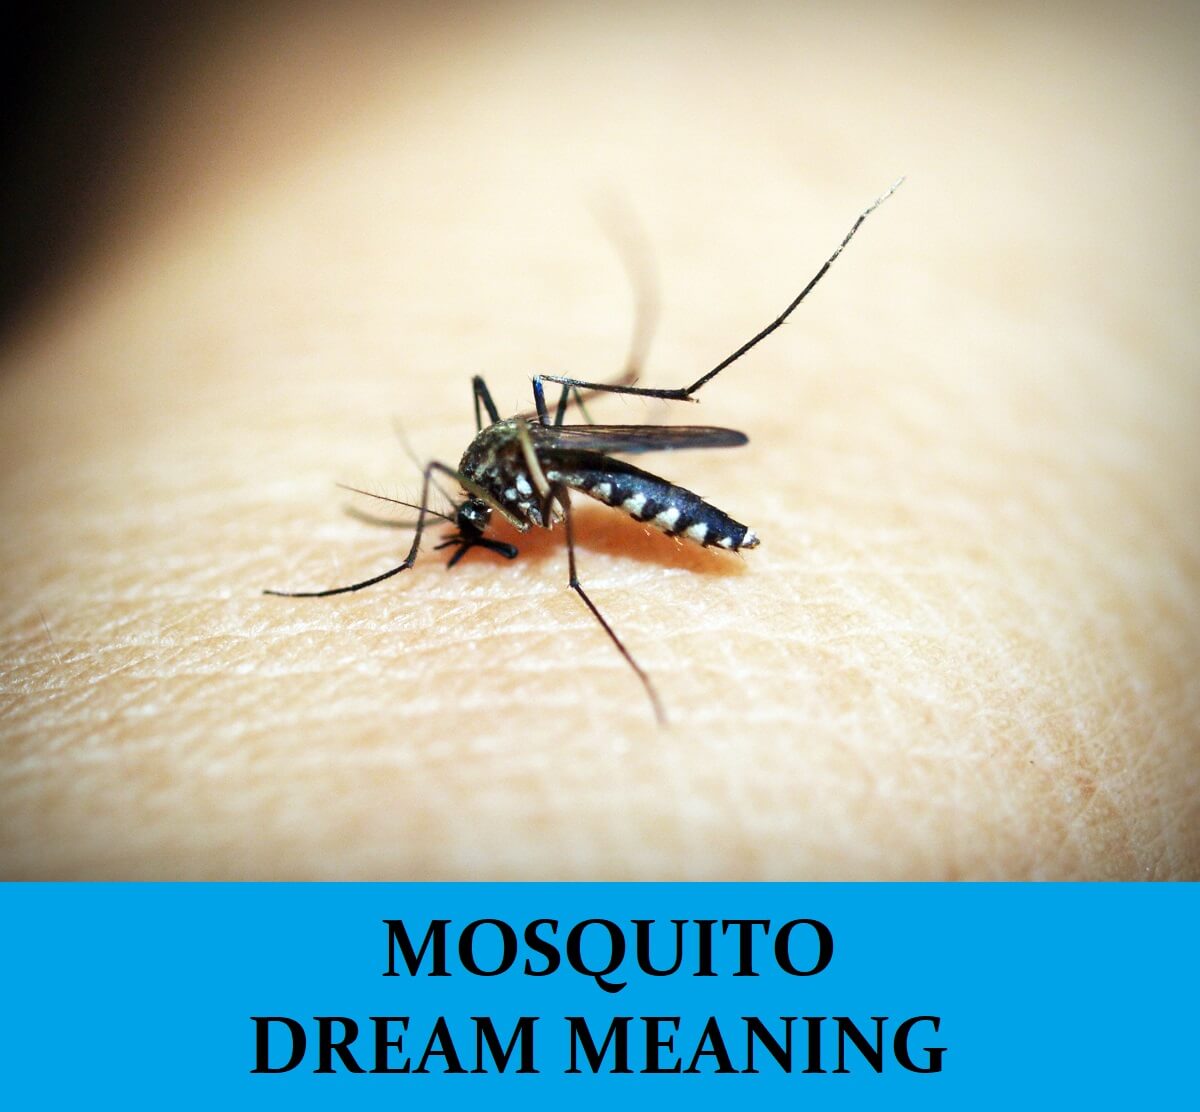 Dream About Mosquitoes